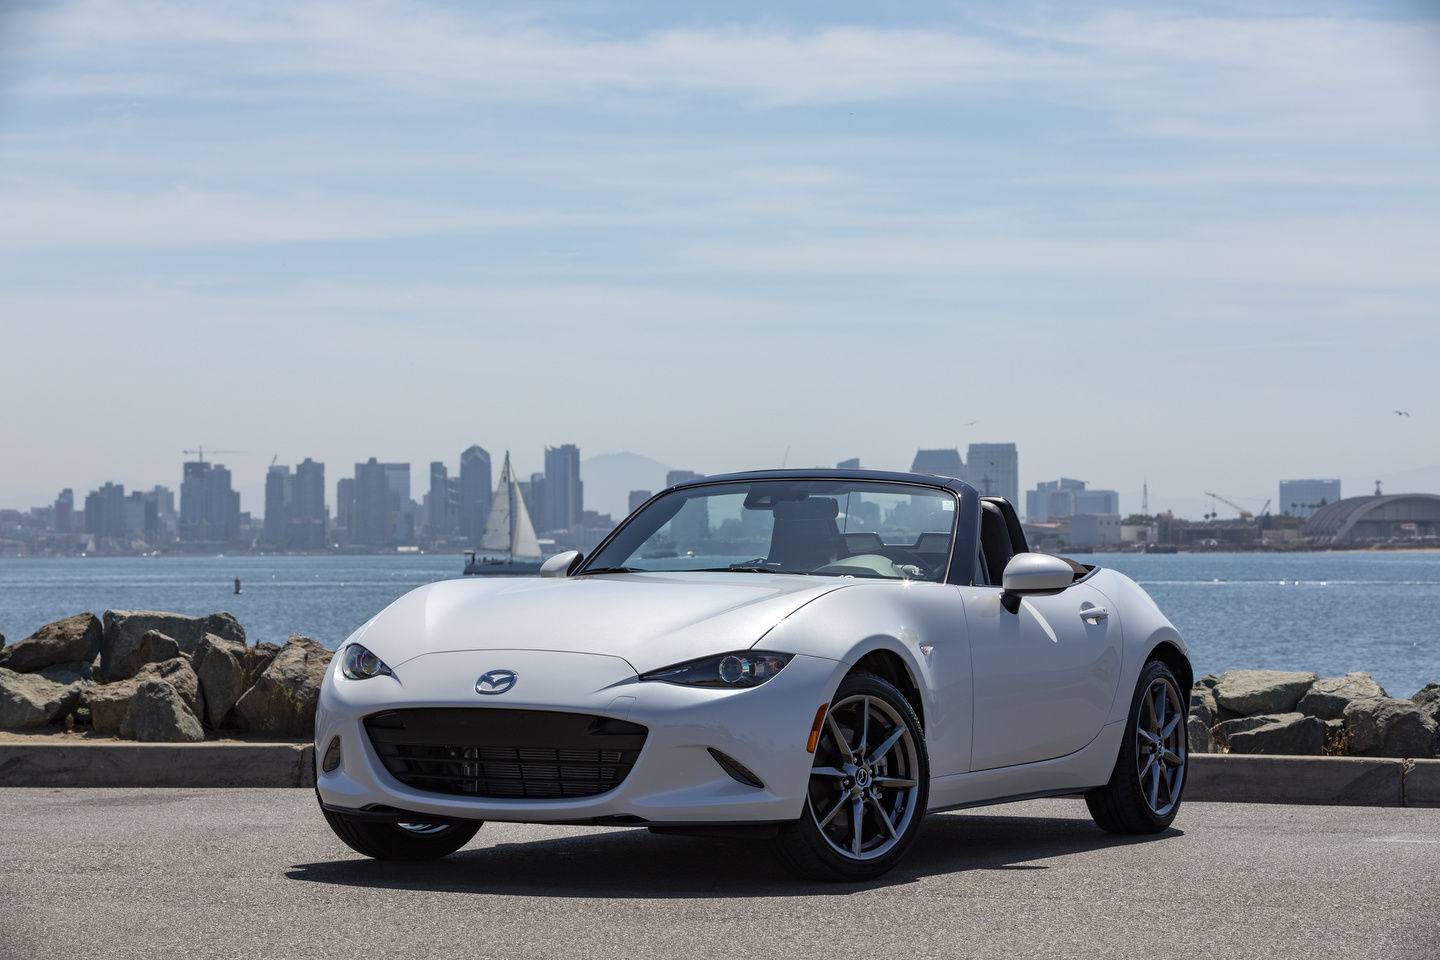 Why is the 2022 Mazda MX-5 the Perfect Car for Summer?